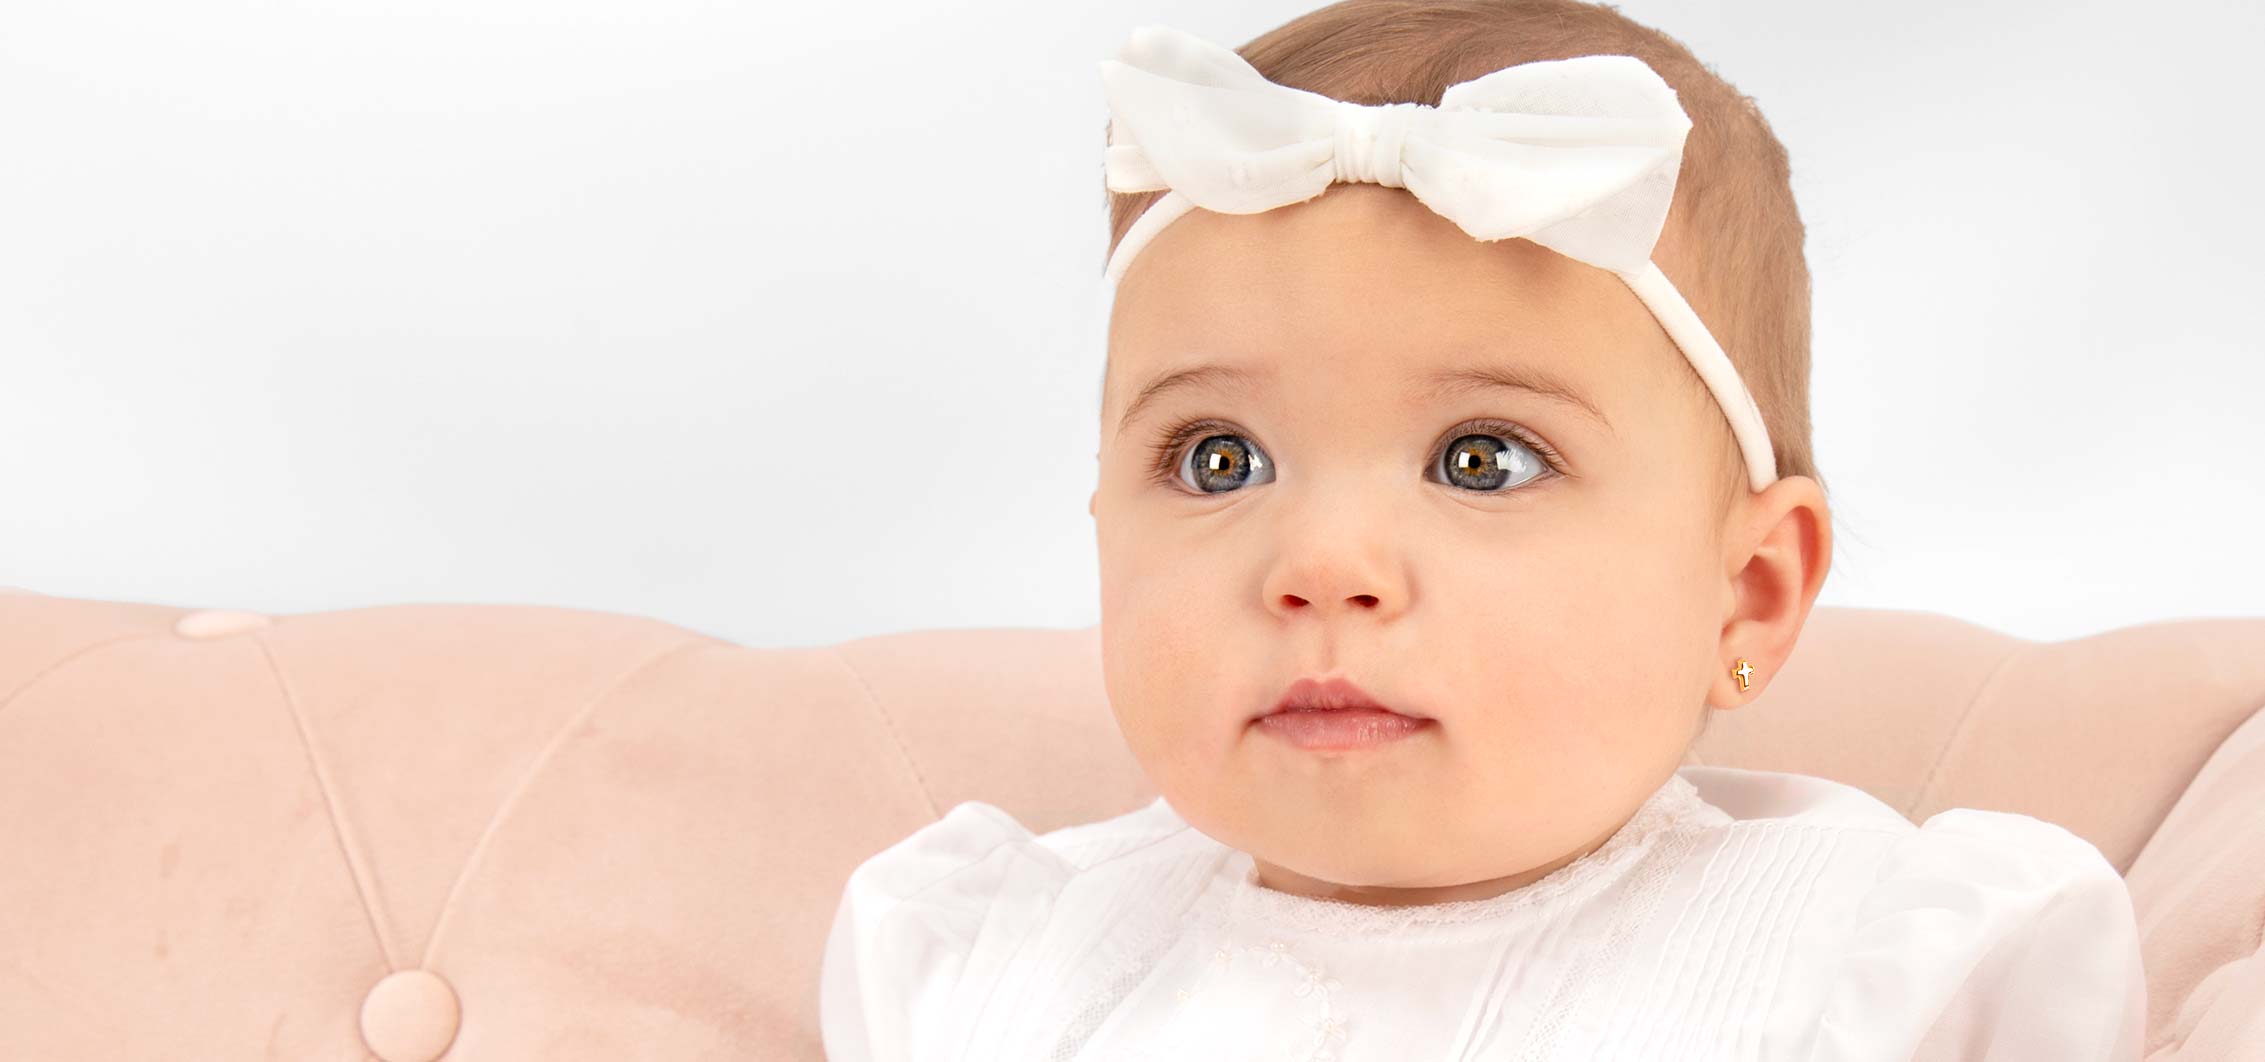 Piercing Baby's Ears: What Type Of Earrings Should You Go For?